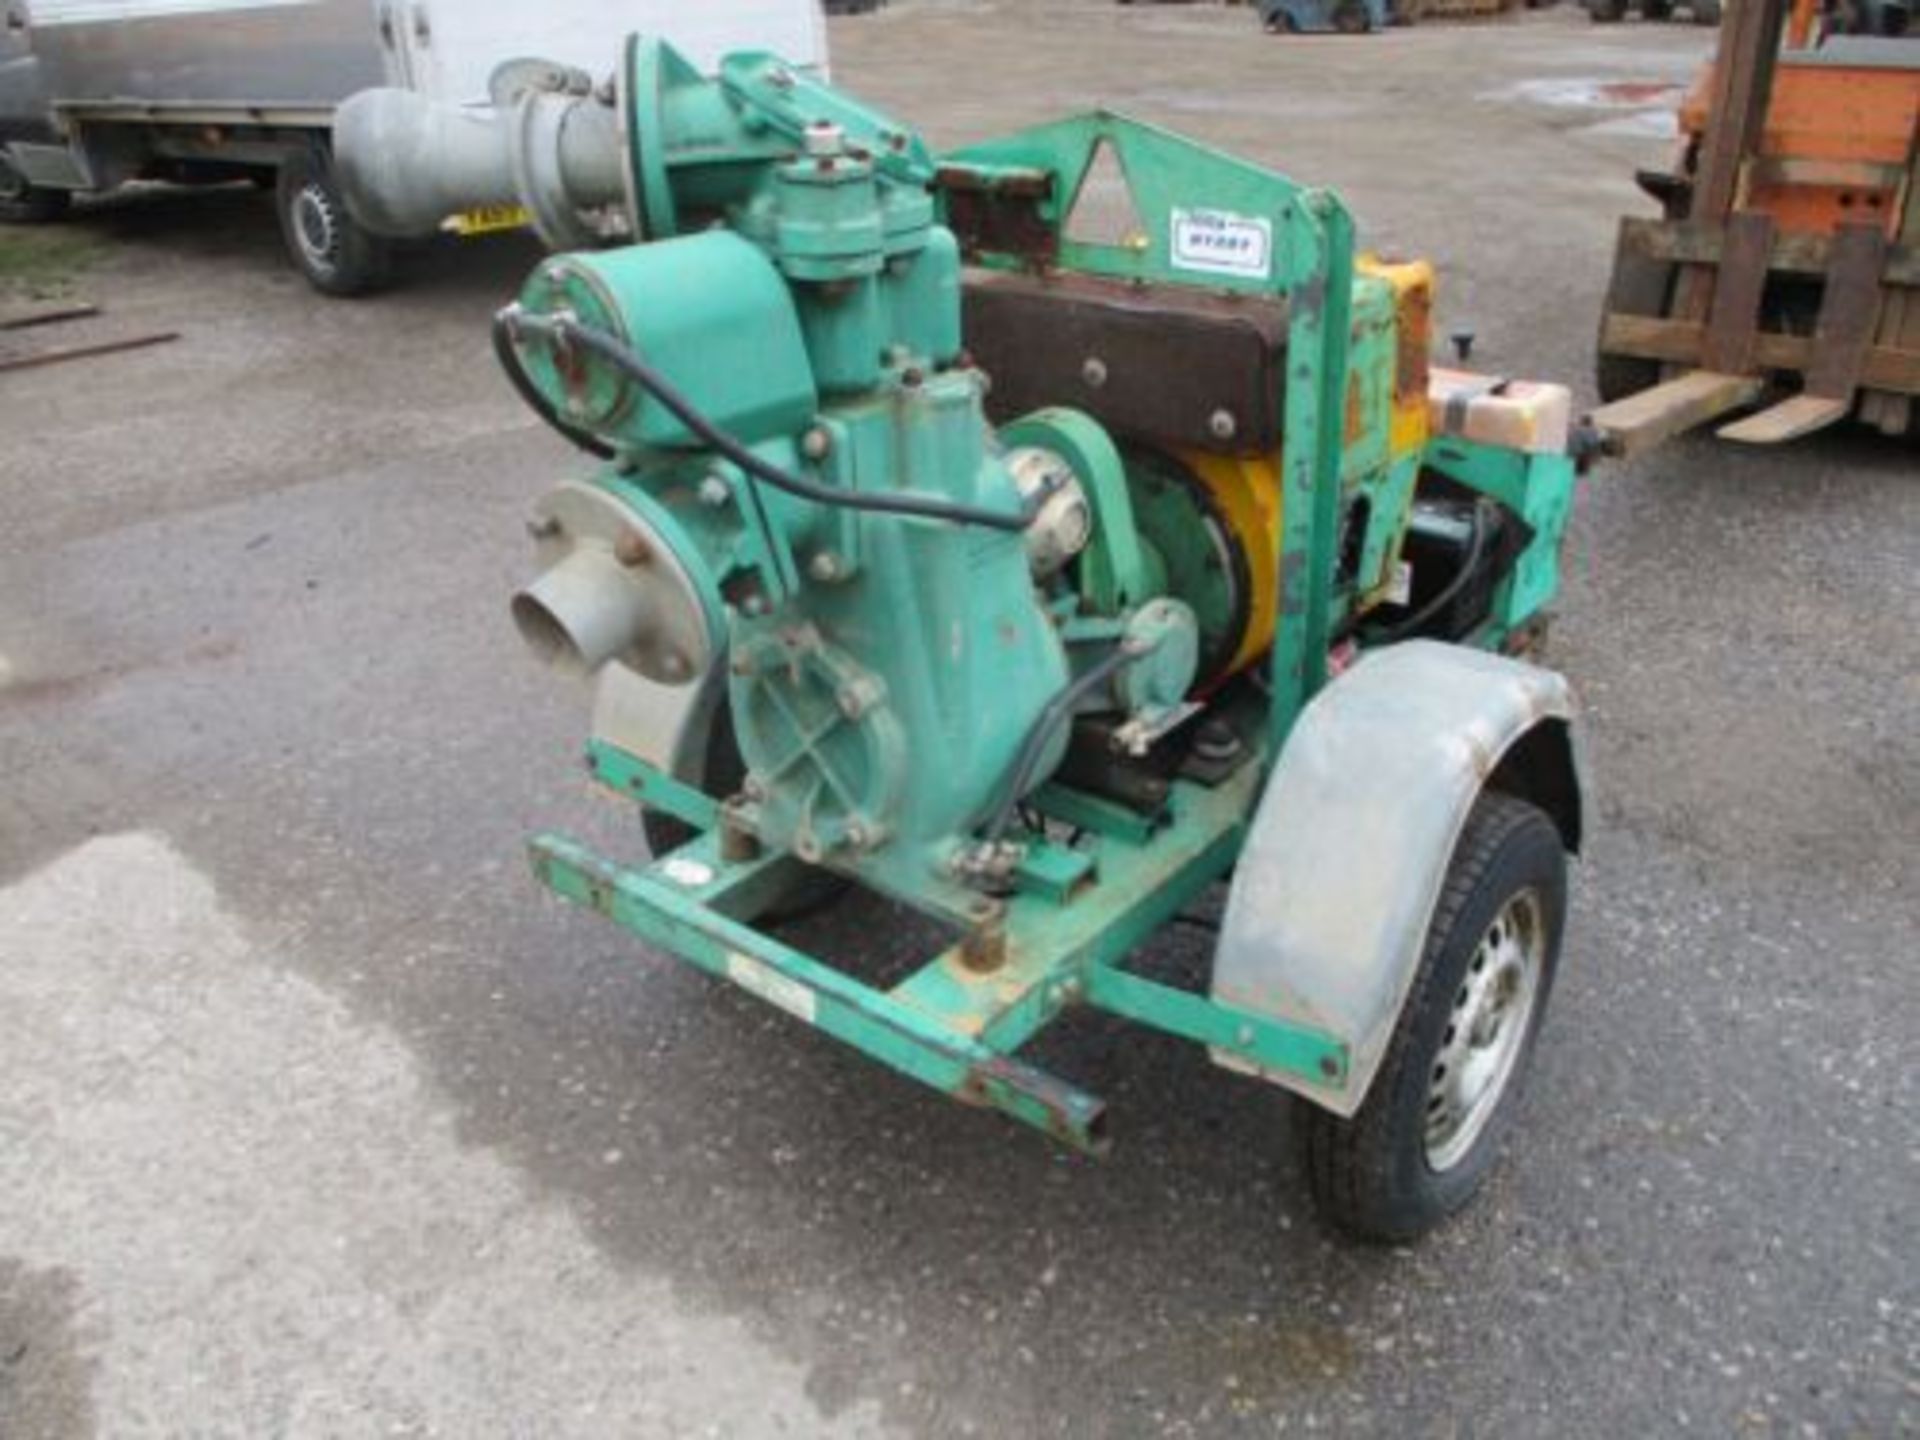 HILTA HYDRY 4 INCH " TOWABLE WATER PUMP HATZ DIESEL ENGINE DELIVERY ARRANGED - Image 2 of 5